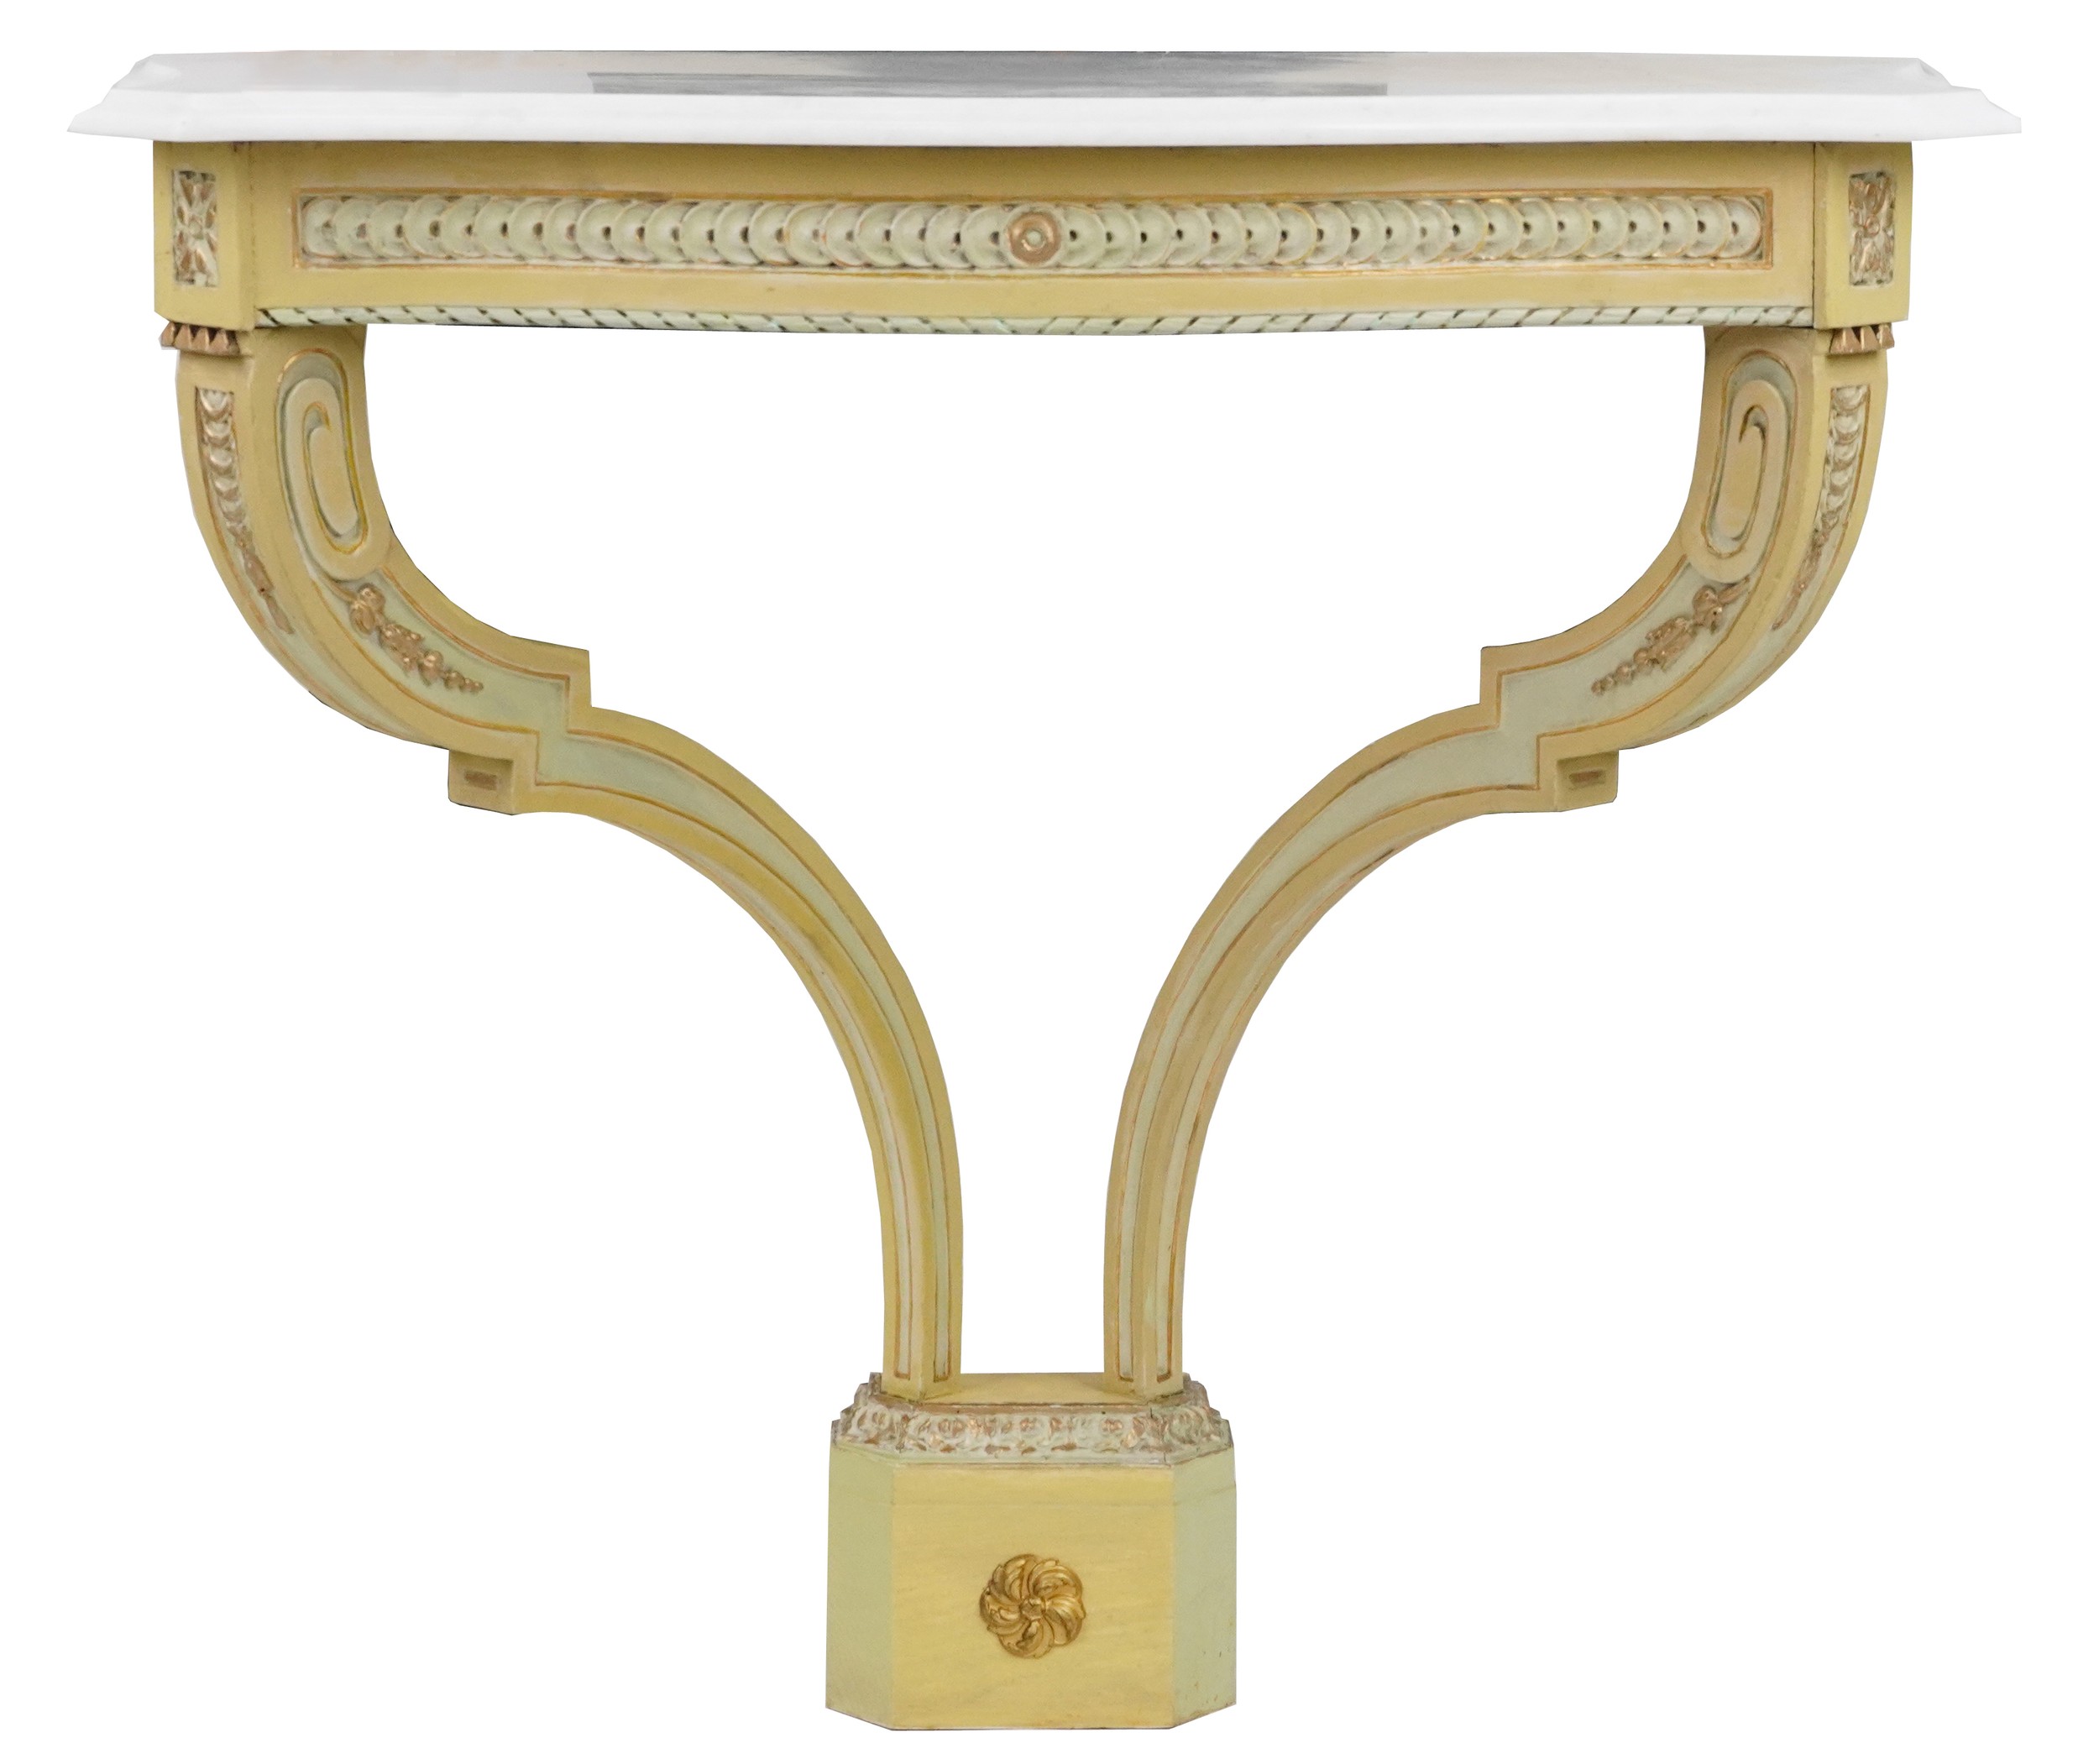 French cream and gilt painted console table with marble top, 85.5cm H x 84cm W x 43cm D